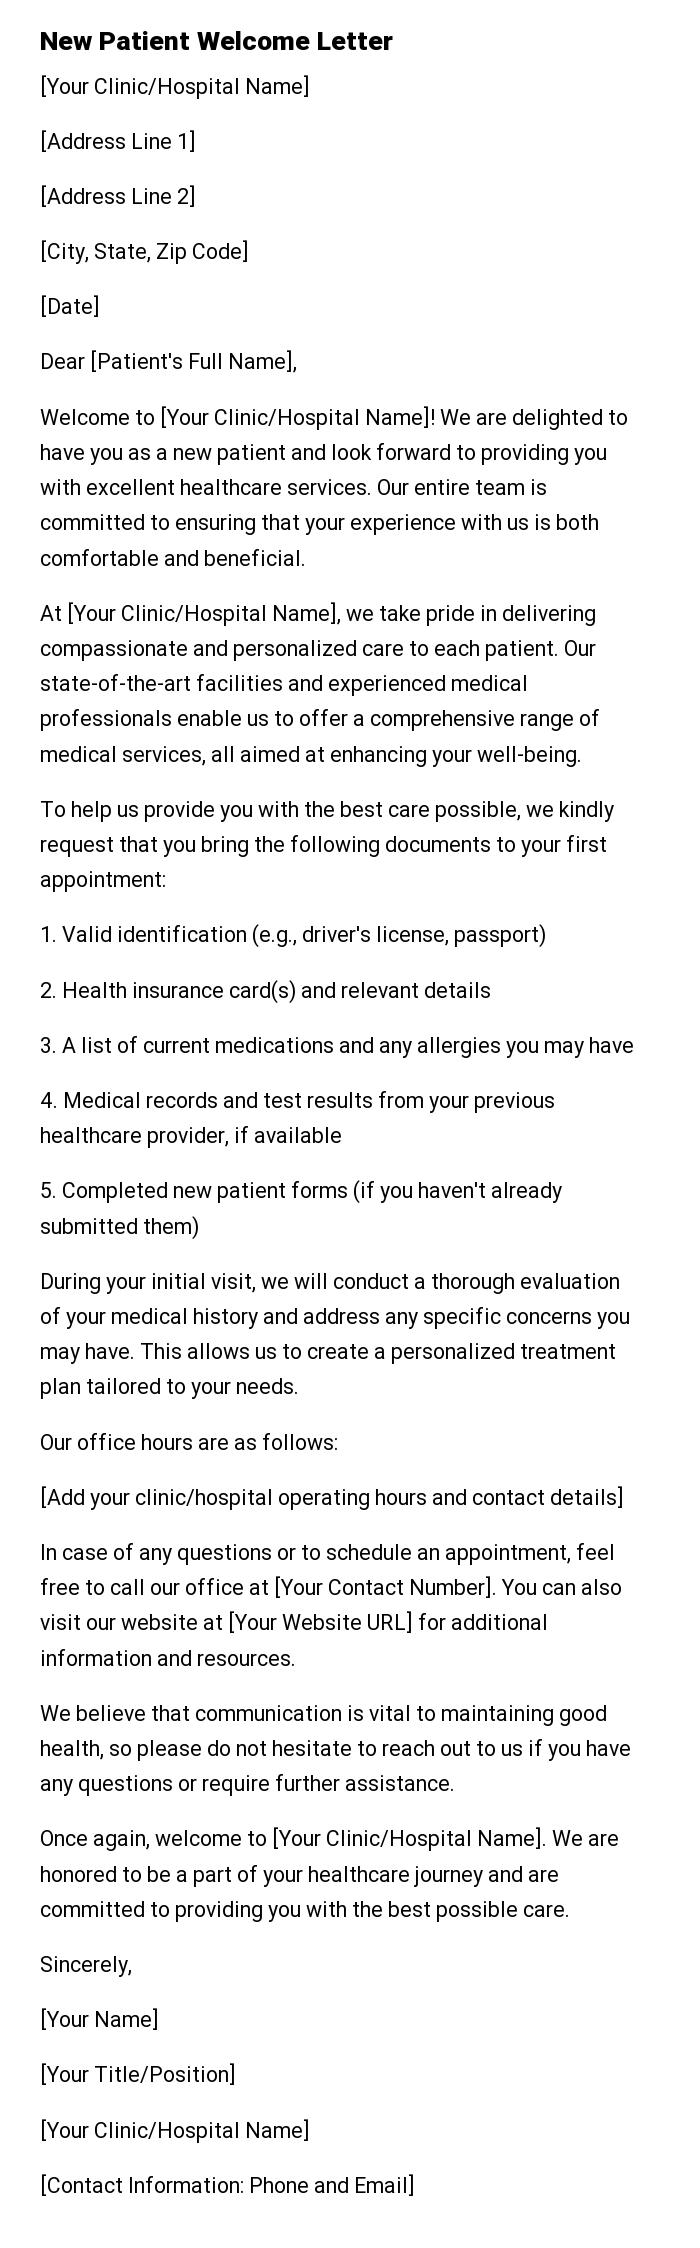 New Patient Welcome Letter